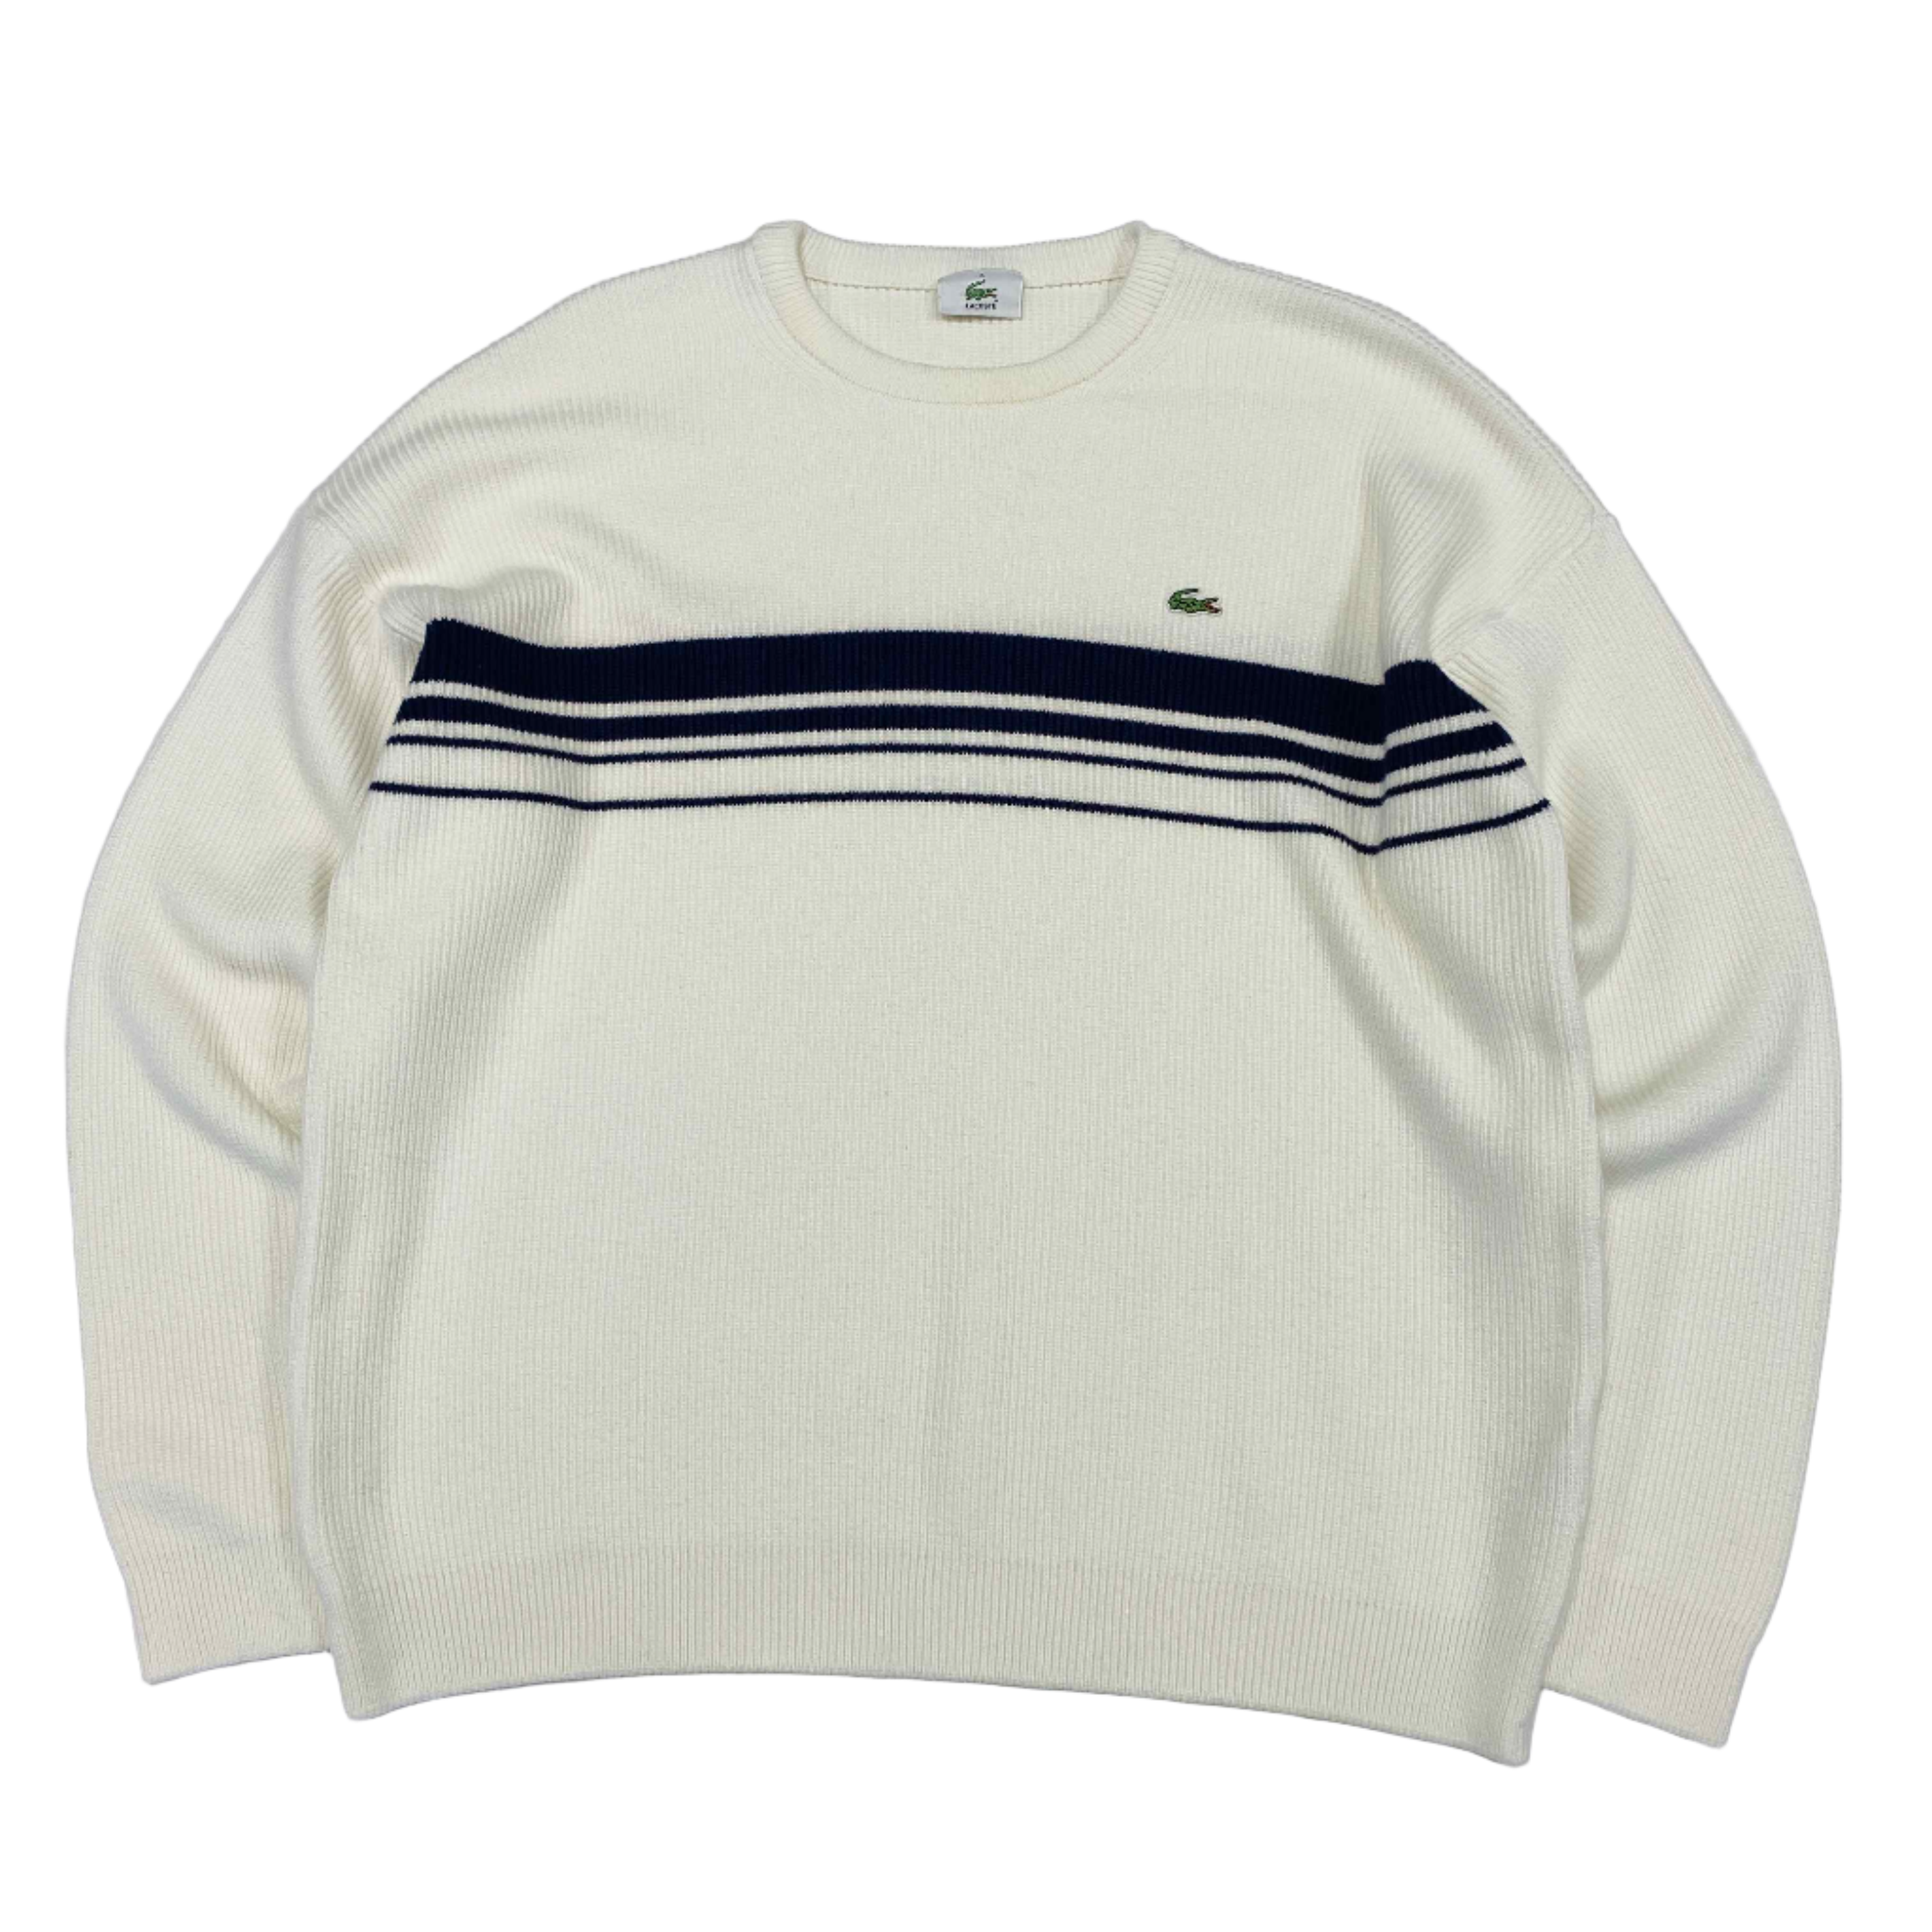 Lacoste Knitted Jumper - XL